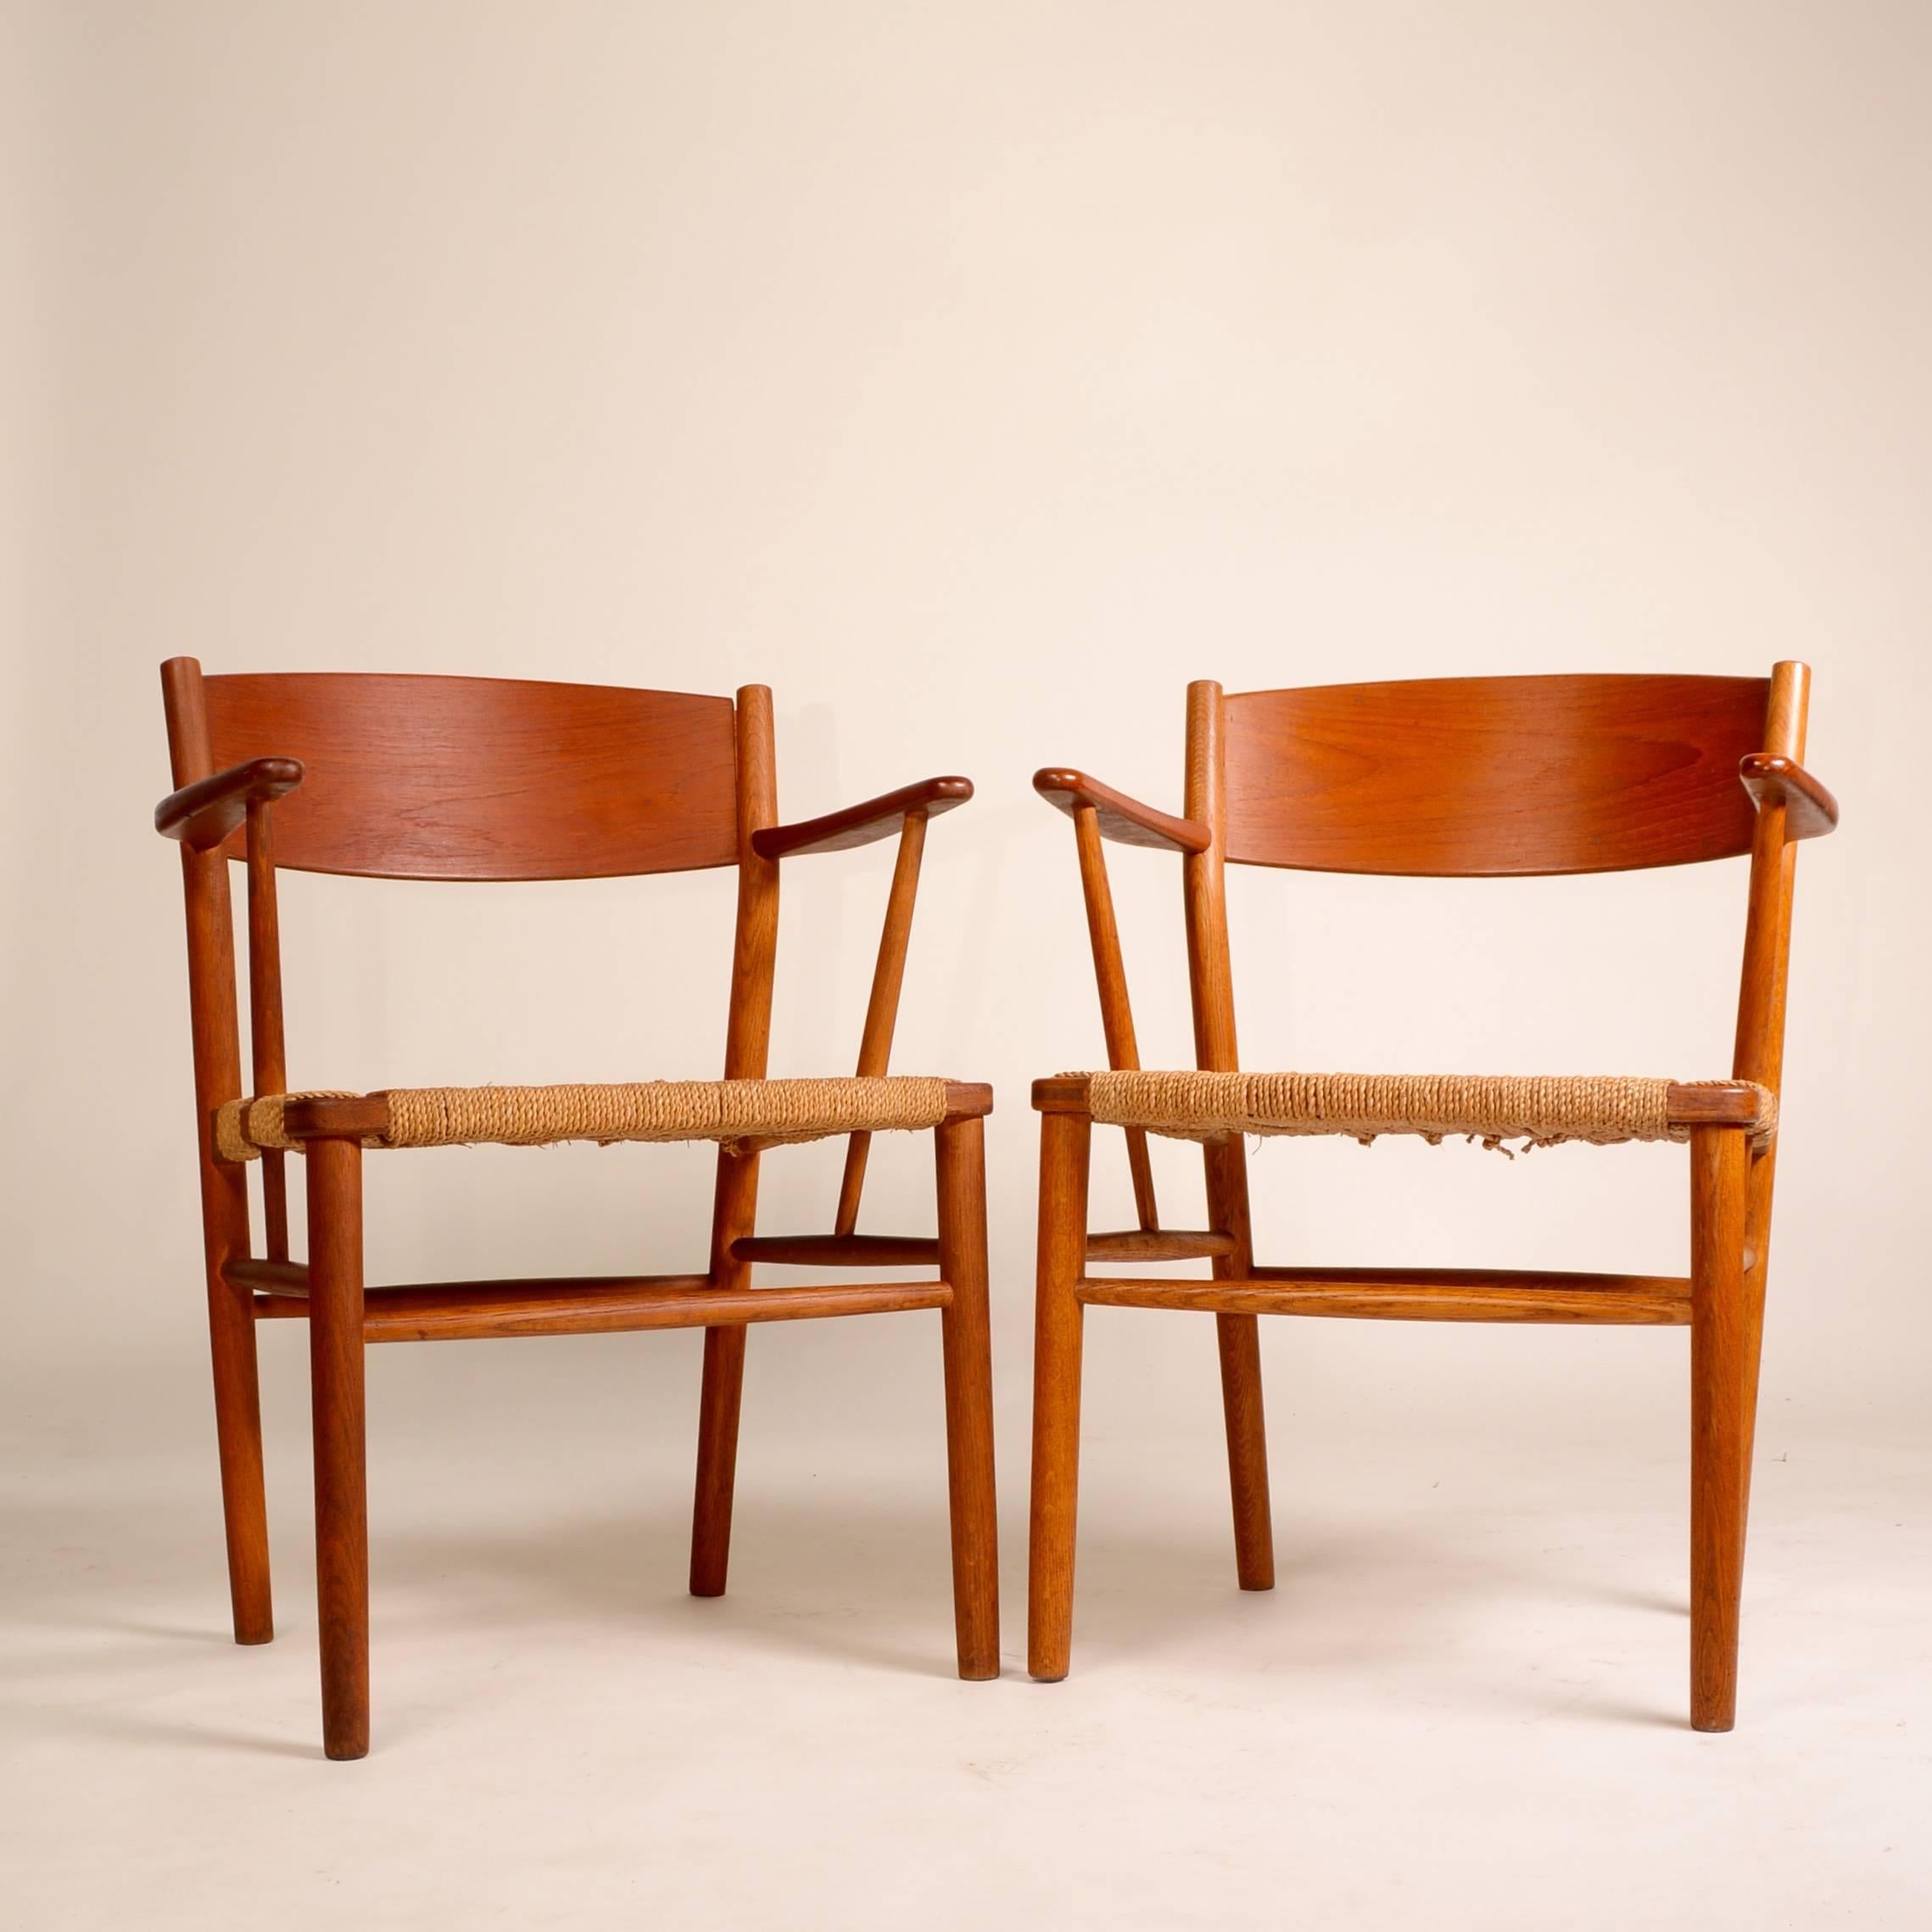 Set of two Børge Mogensen armchairs for Soborg Mobler, 1954. Made from teak backs, white oak frame and woven seagrass seats. This set includes two armchairs.